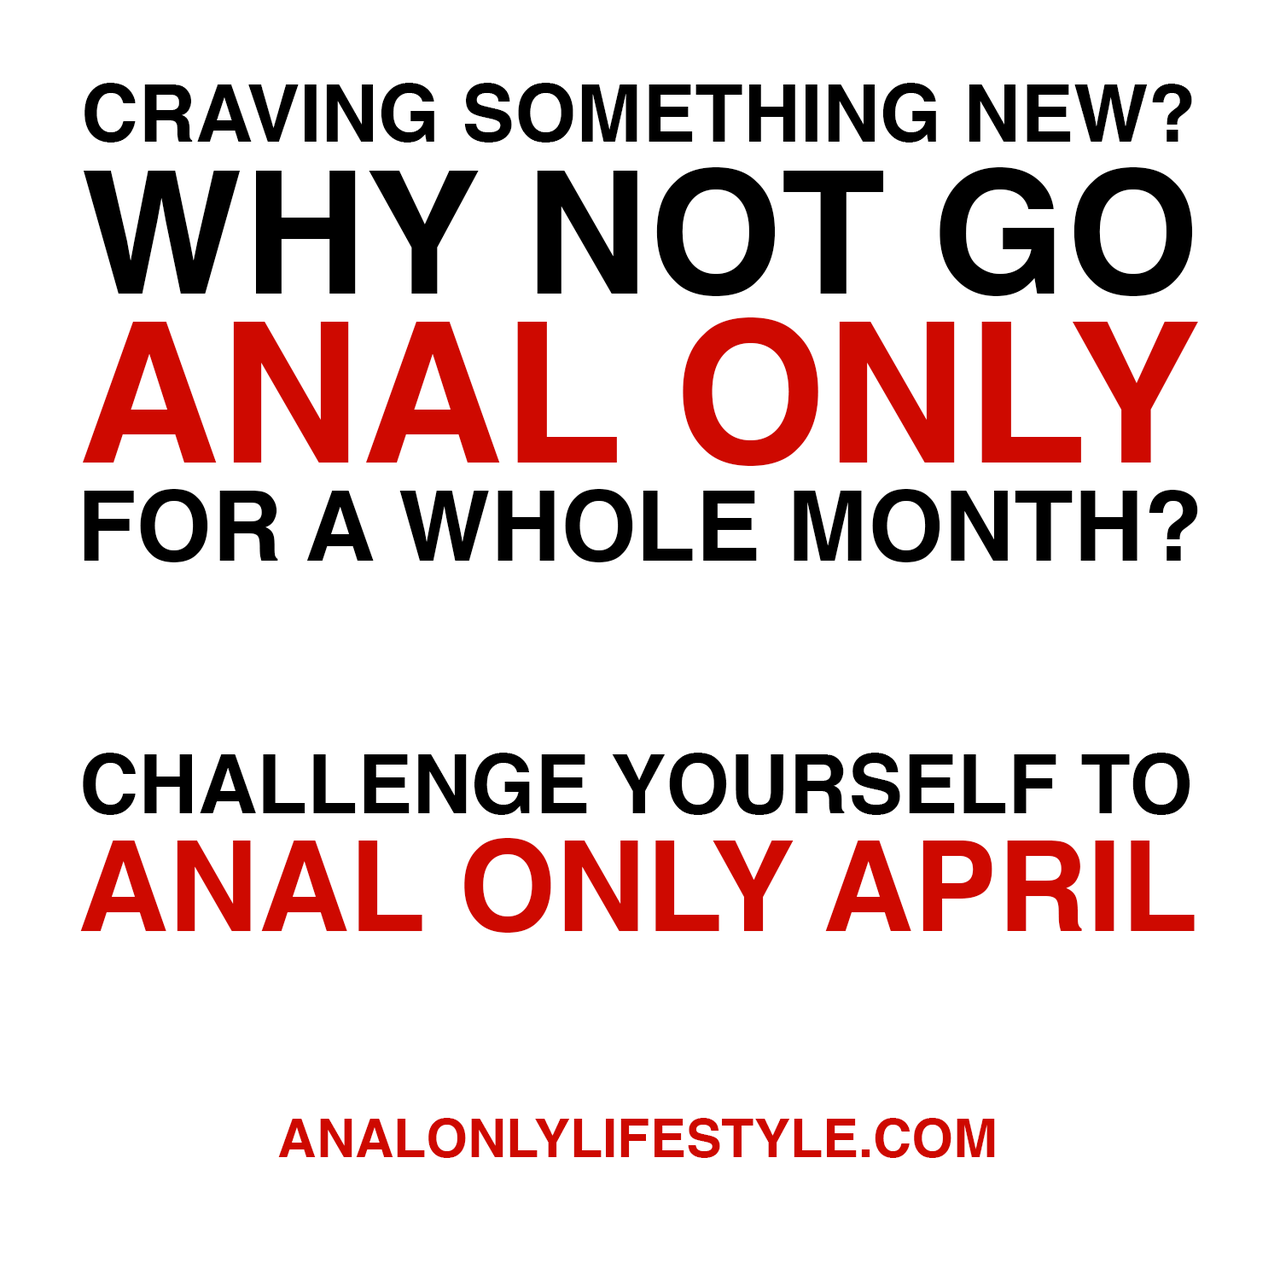 Craving something new? Why not go anal only for a whole month? Challenge yourself to Anal Only April.